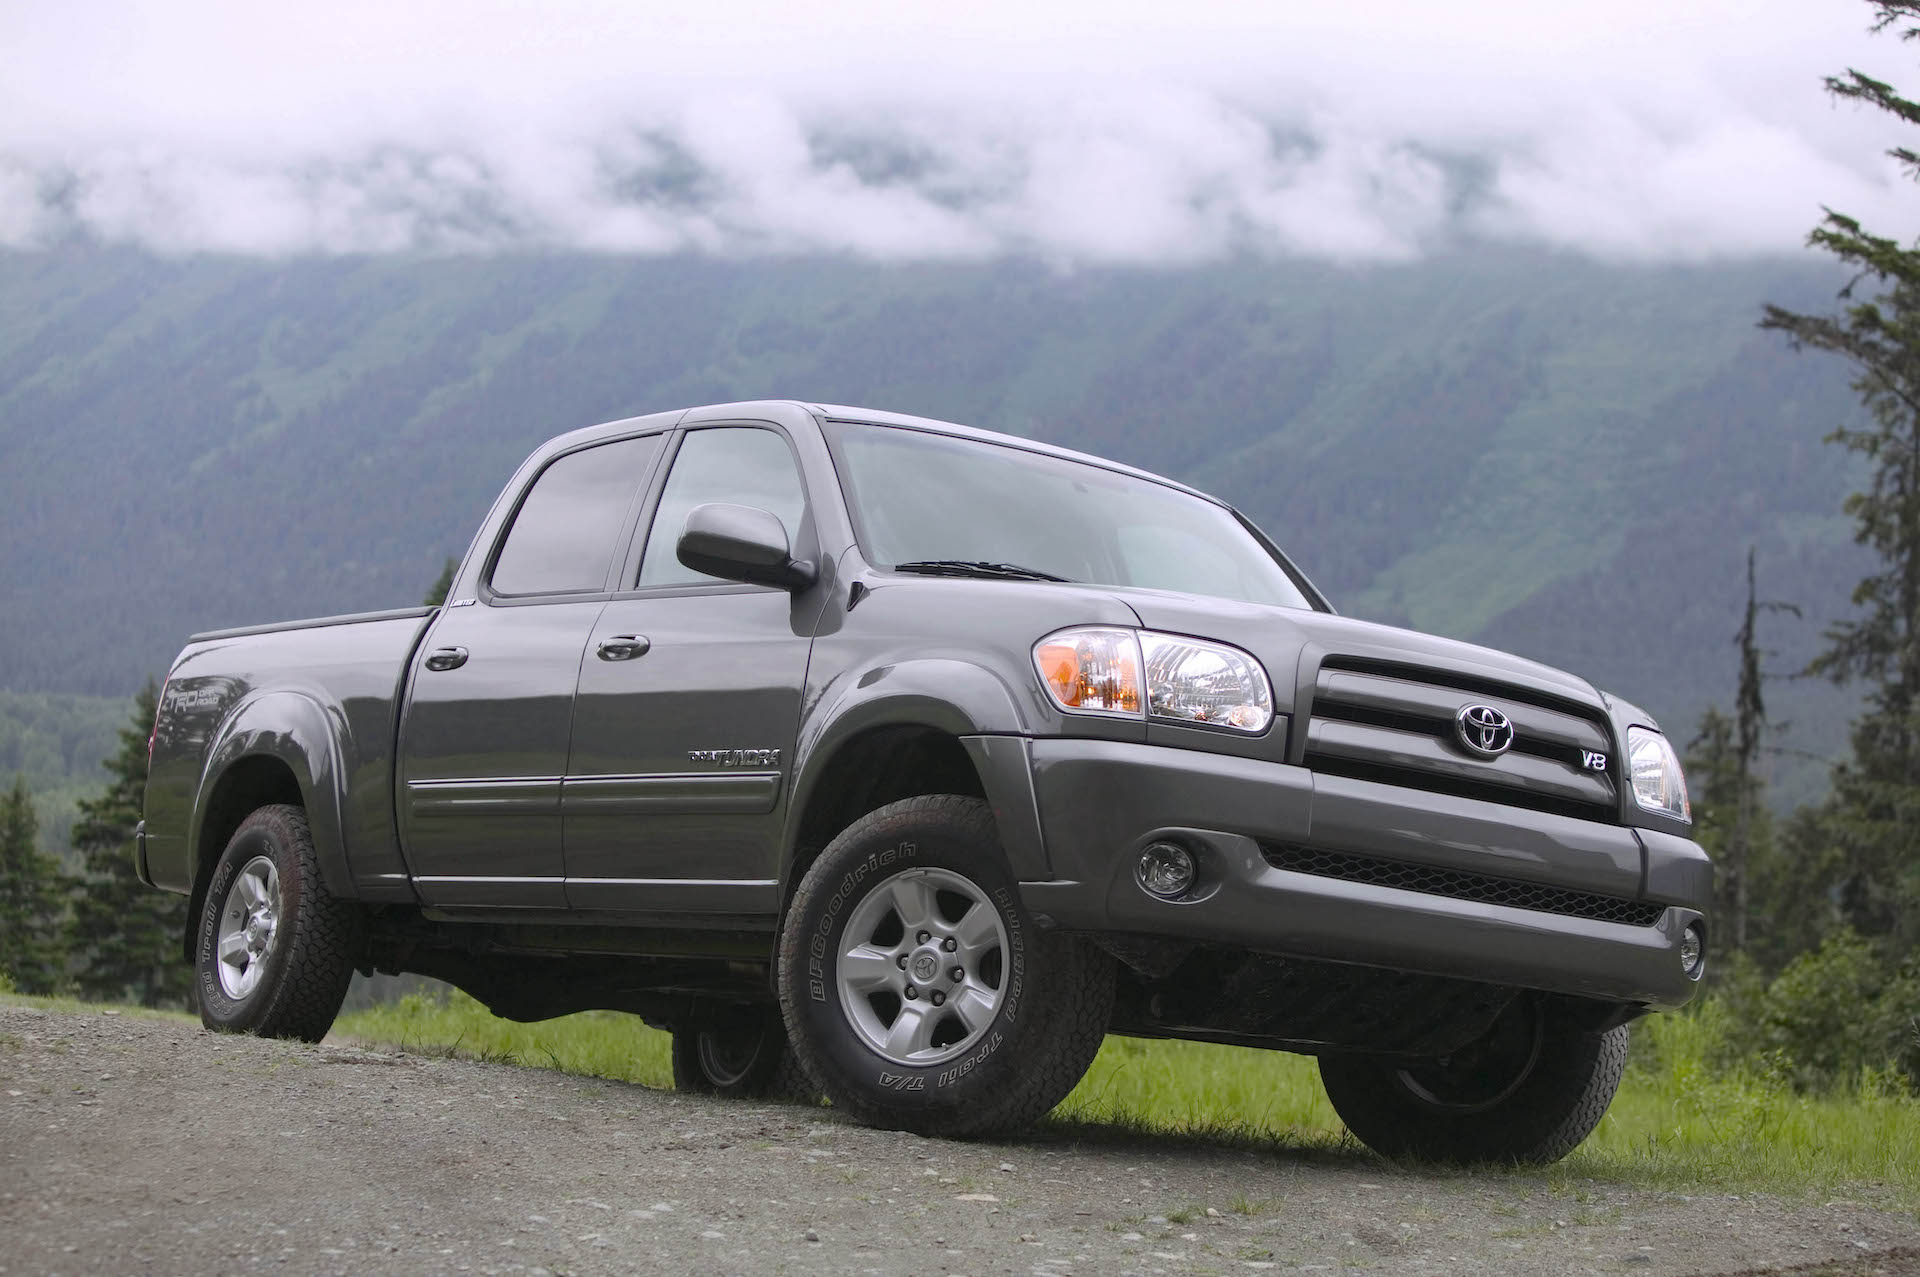 An image of a Toyota Tundra parked outside.